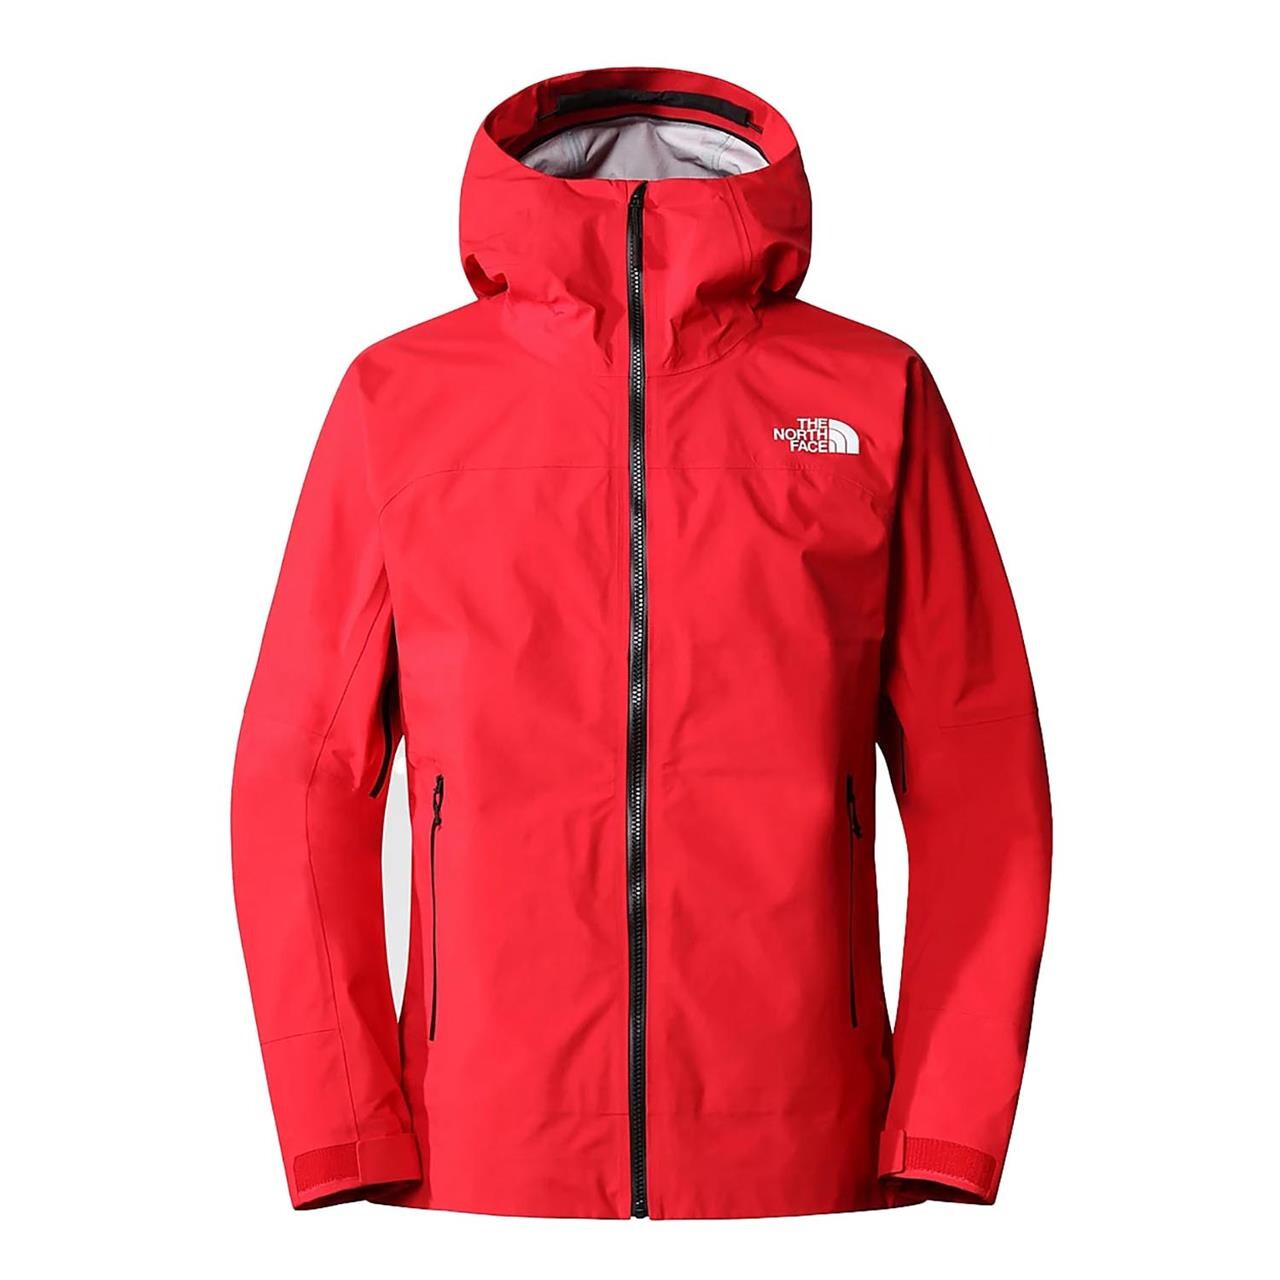 Billede af The North Face Mens Summit Chamlang Futurelight Jacket (Rød (TNF RED) Small)